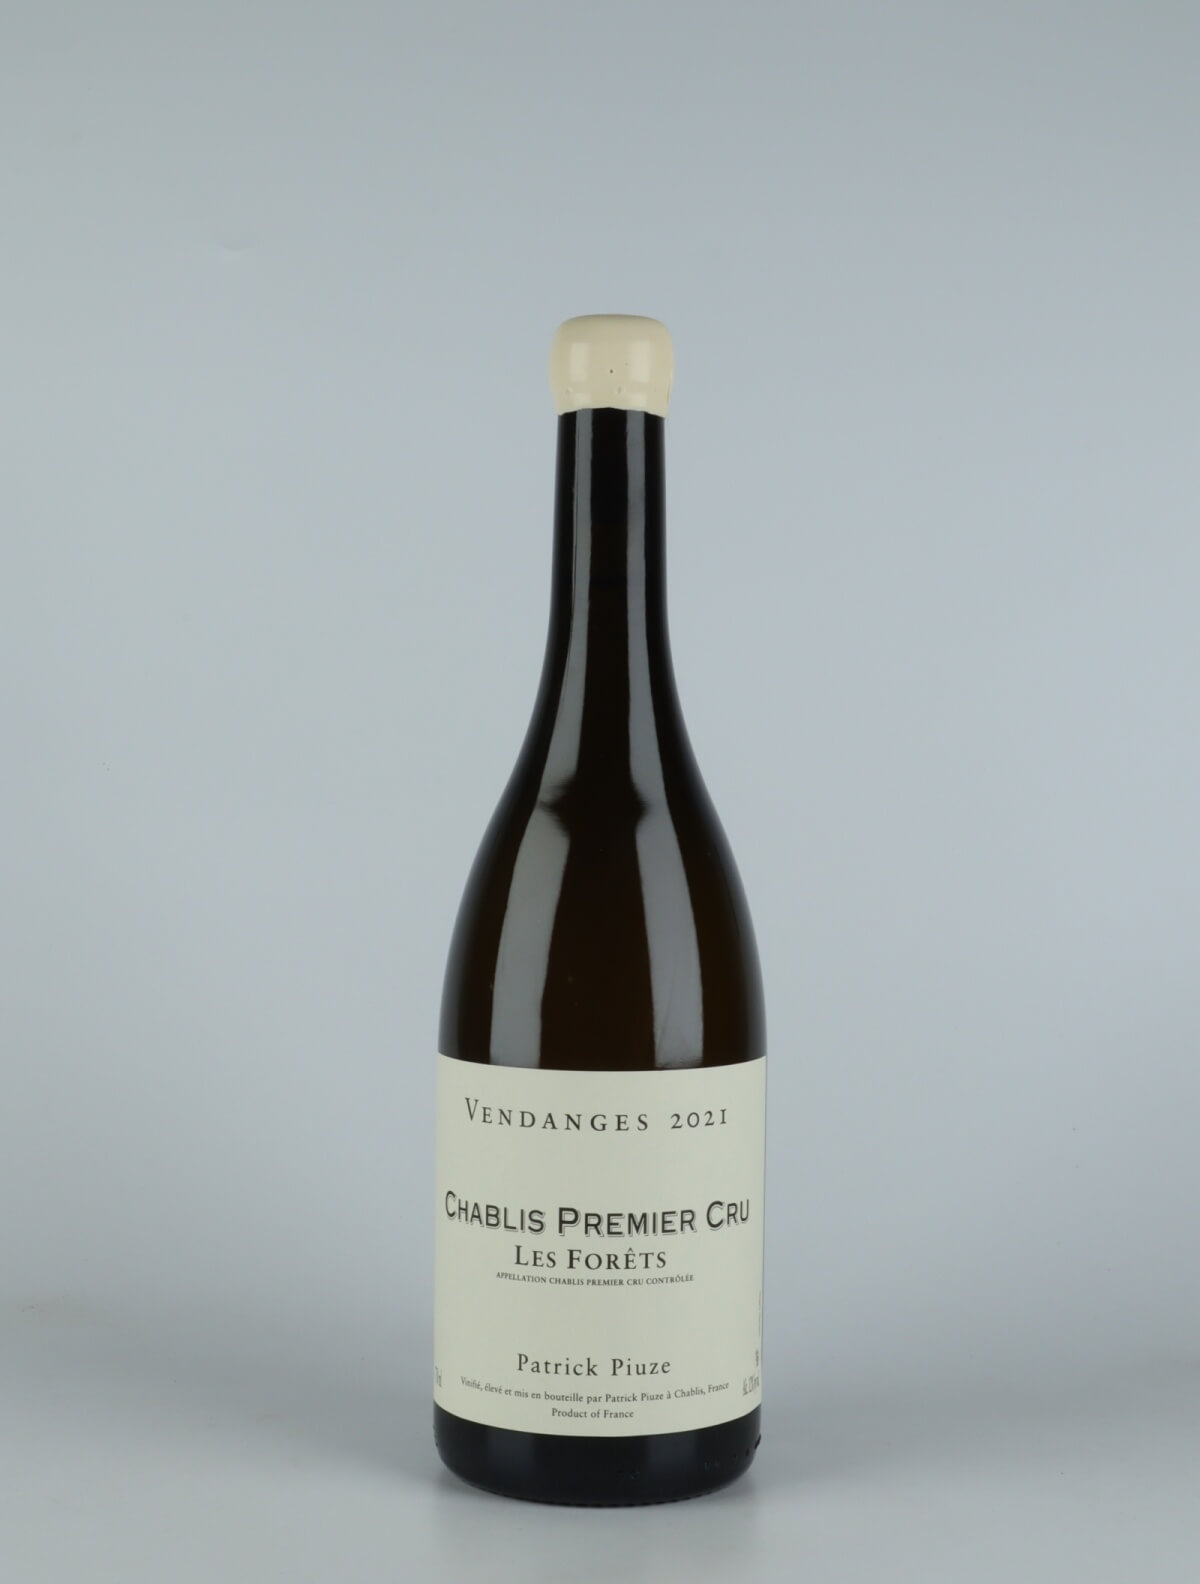 A bottle 2021 Chablis 1. Cru - Les Forêts White wine from Patrick Piuze, Burgundy in France